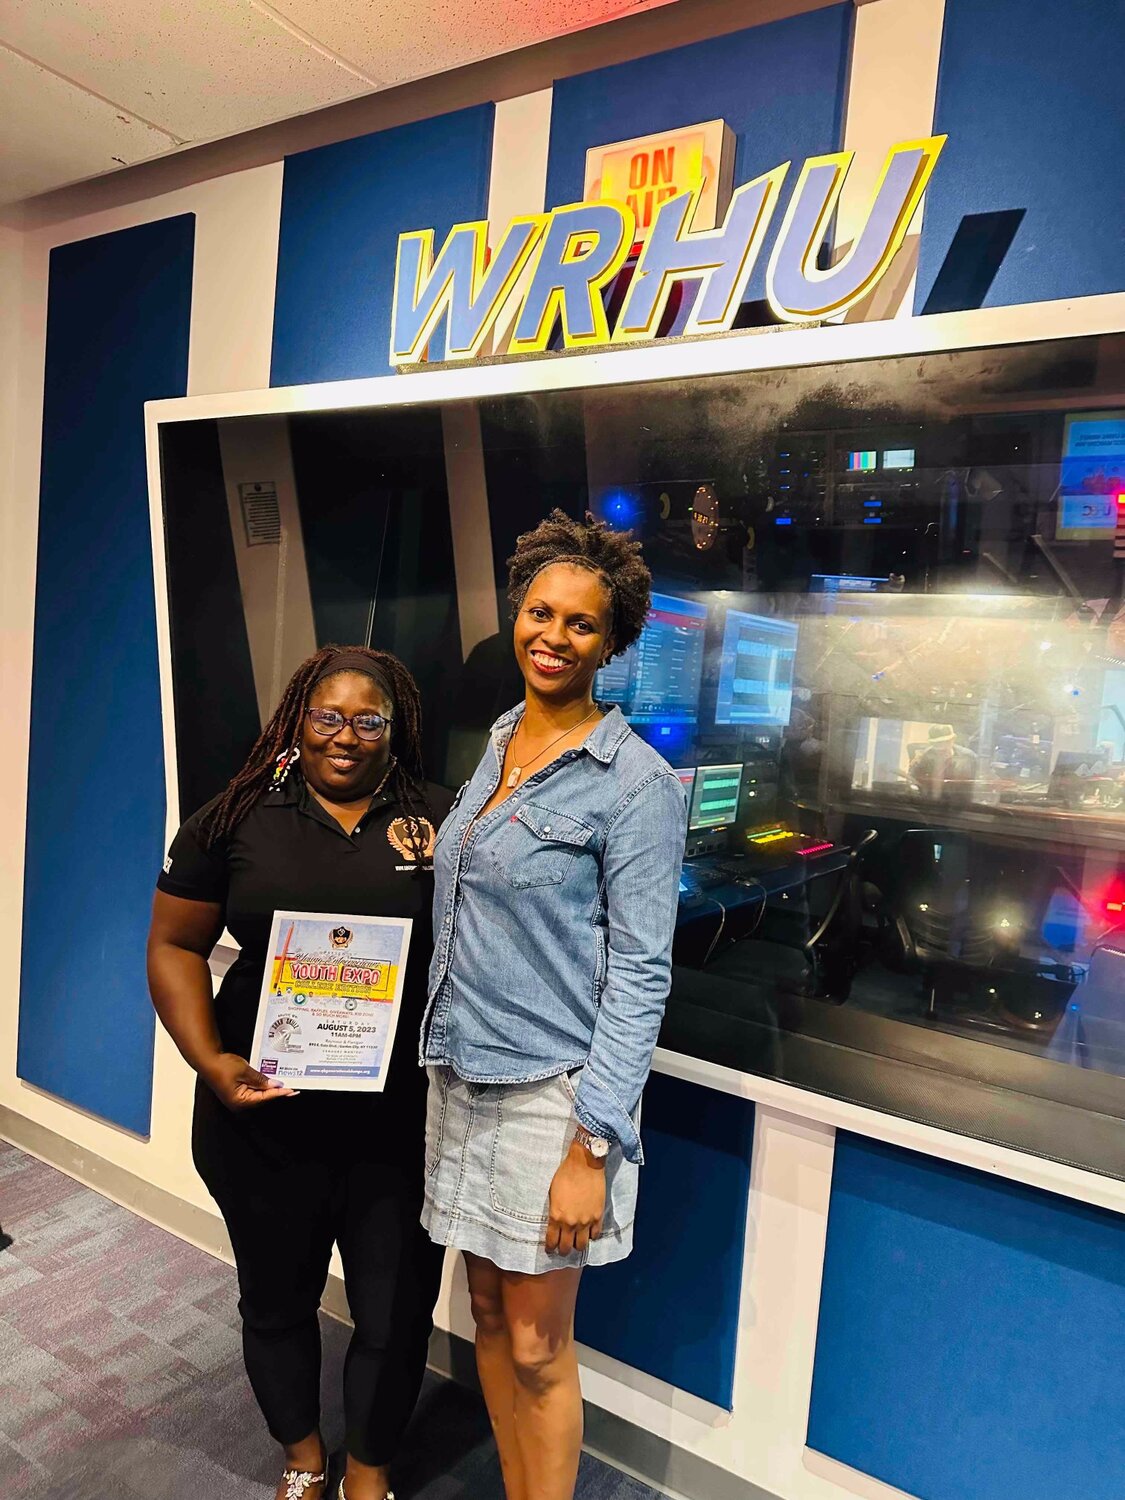 Belinda Watkins (left) discussed the benefits of her nonprofit and its inception with WRHU’s Nicole Burke on Burke’s “Voice of Uniondale” weekly radio broadcast.